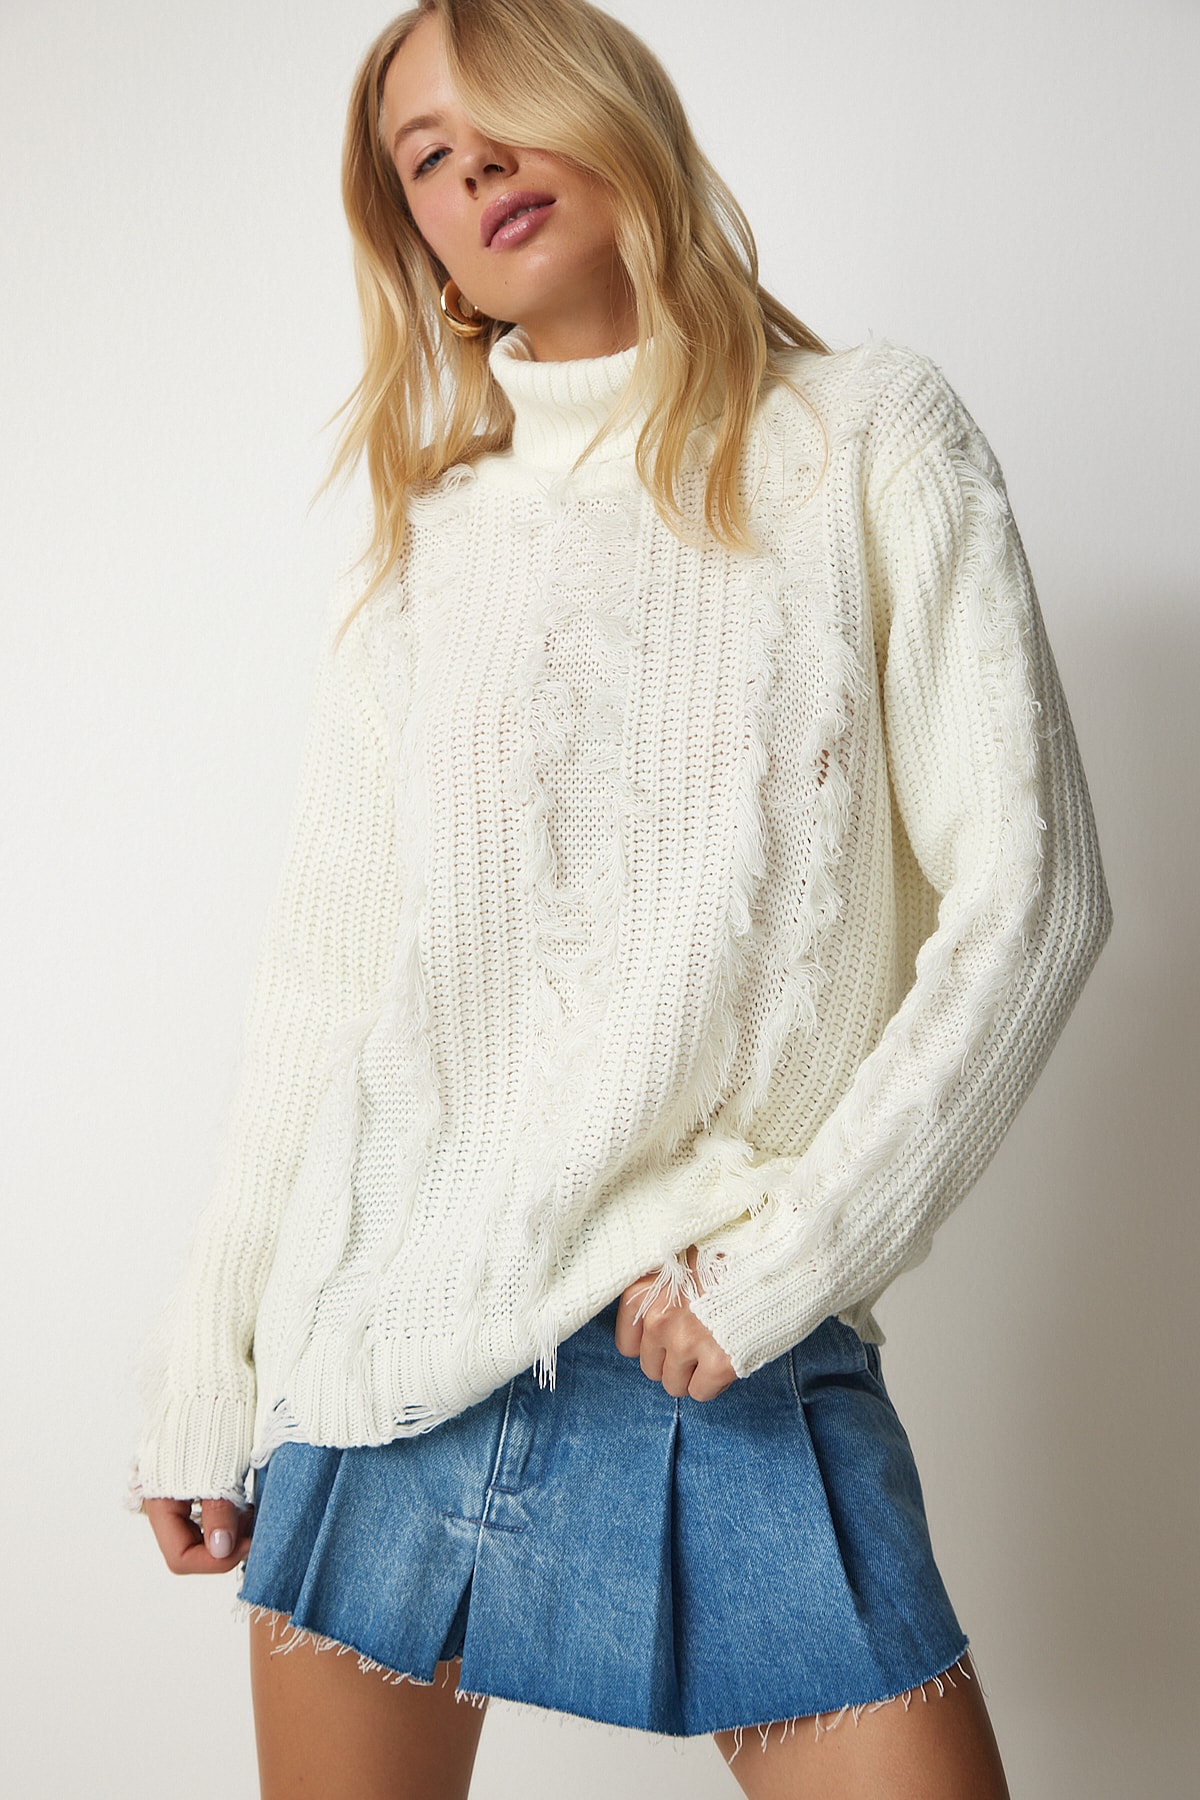 Happiness Istanbul Bone Tassel And Torn Detailed Knitwear Sweater